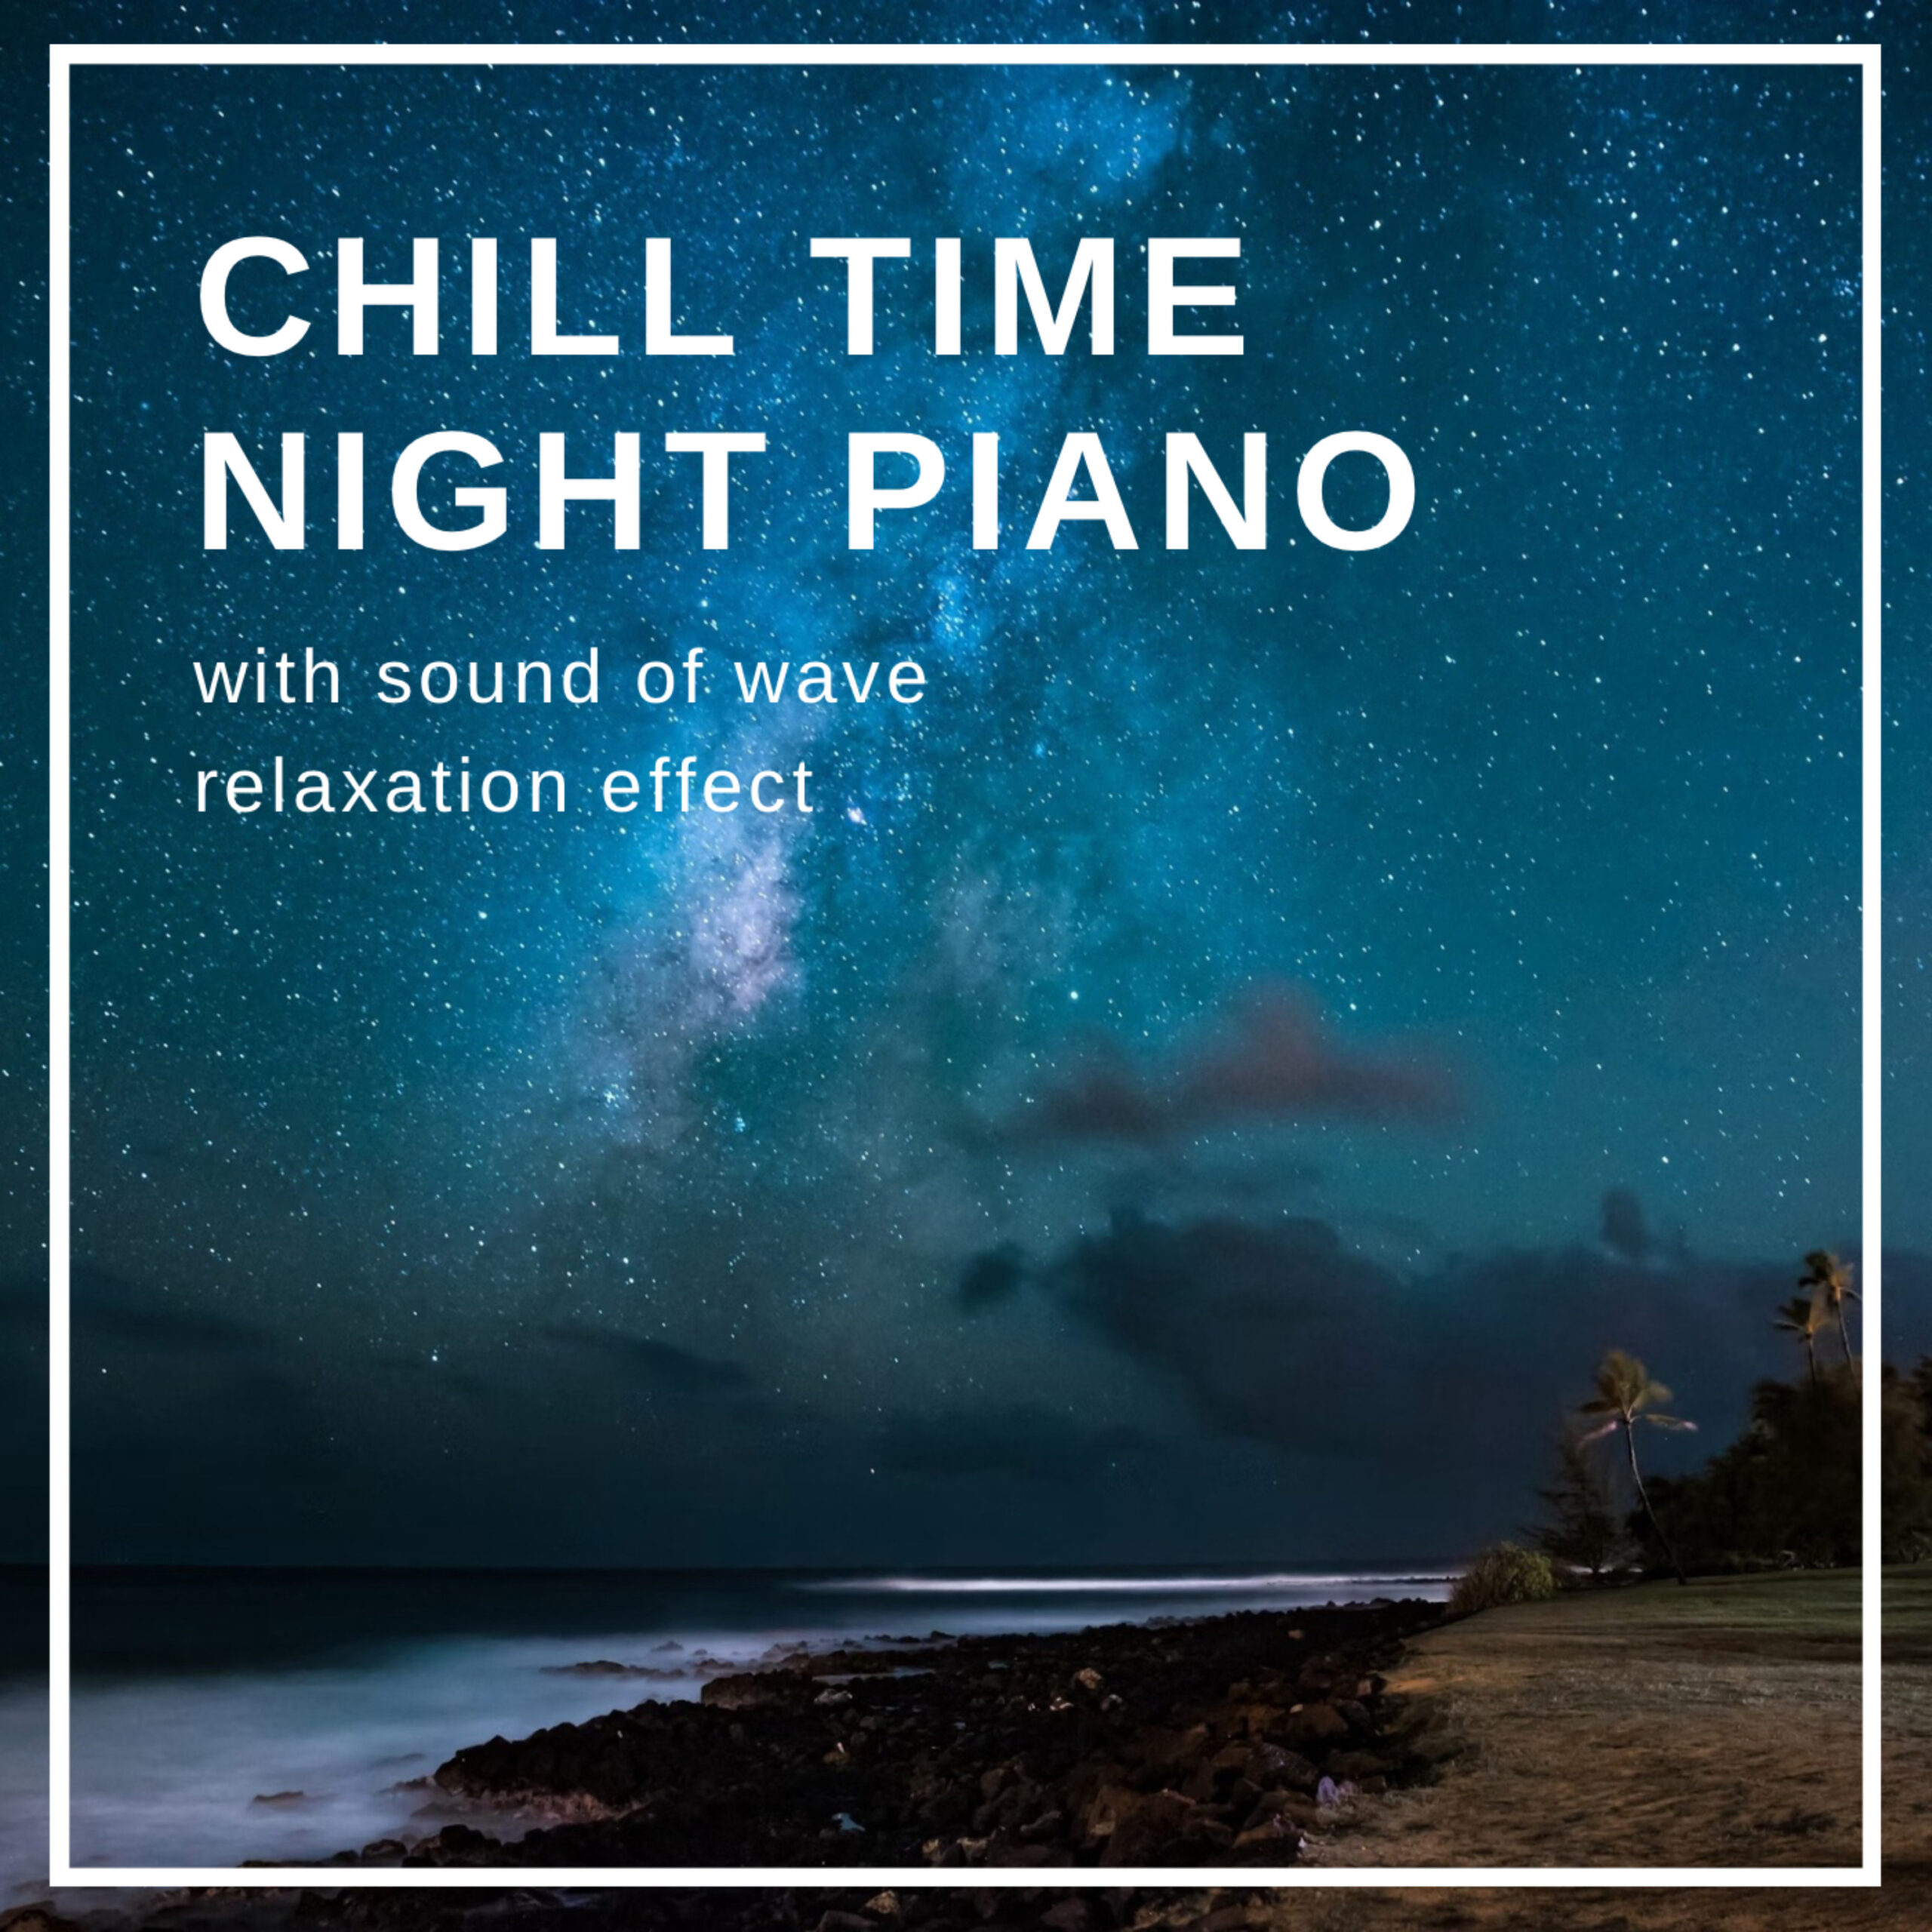 CHILL TIME NIGHT PIANO -with sound of wave relaxation effect- 癒し用 睡眠用 休息用 瞑想用